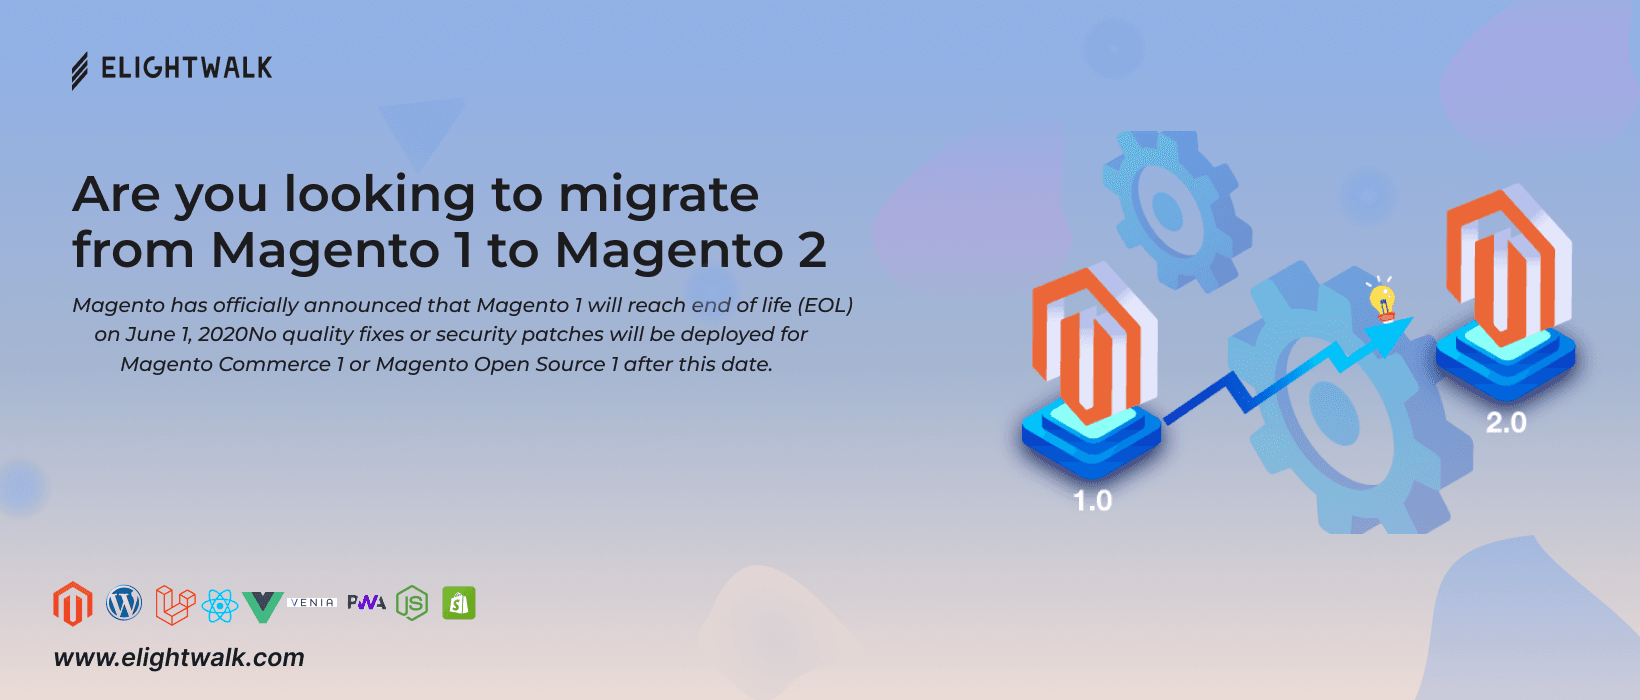 Are you looking to migrate from Magento 1 to Magento 2?